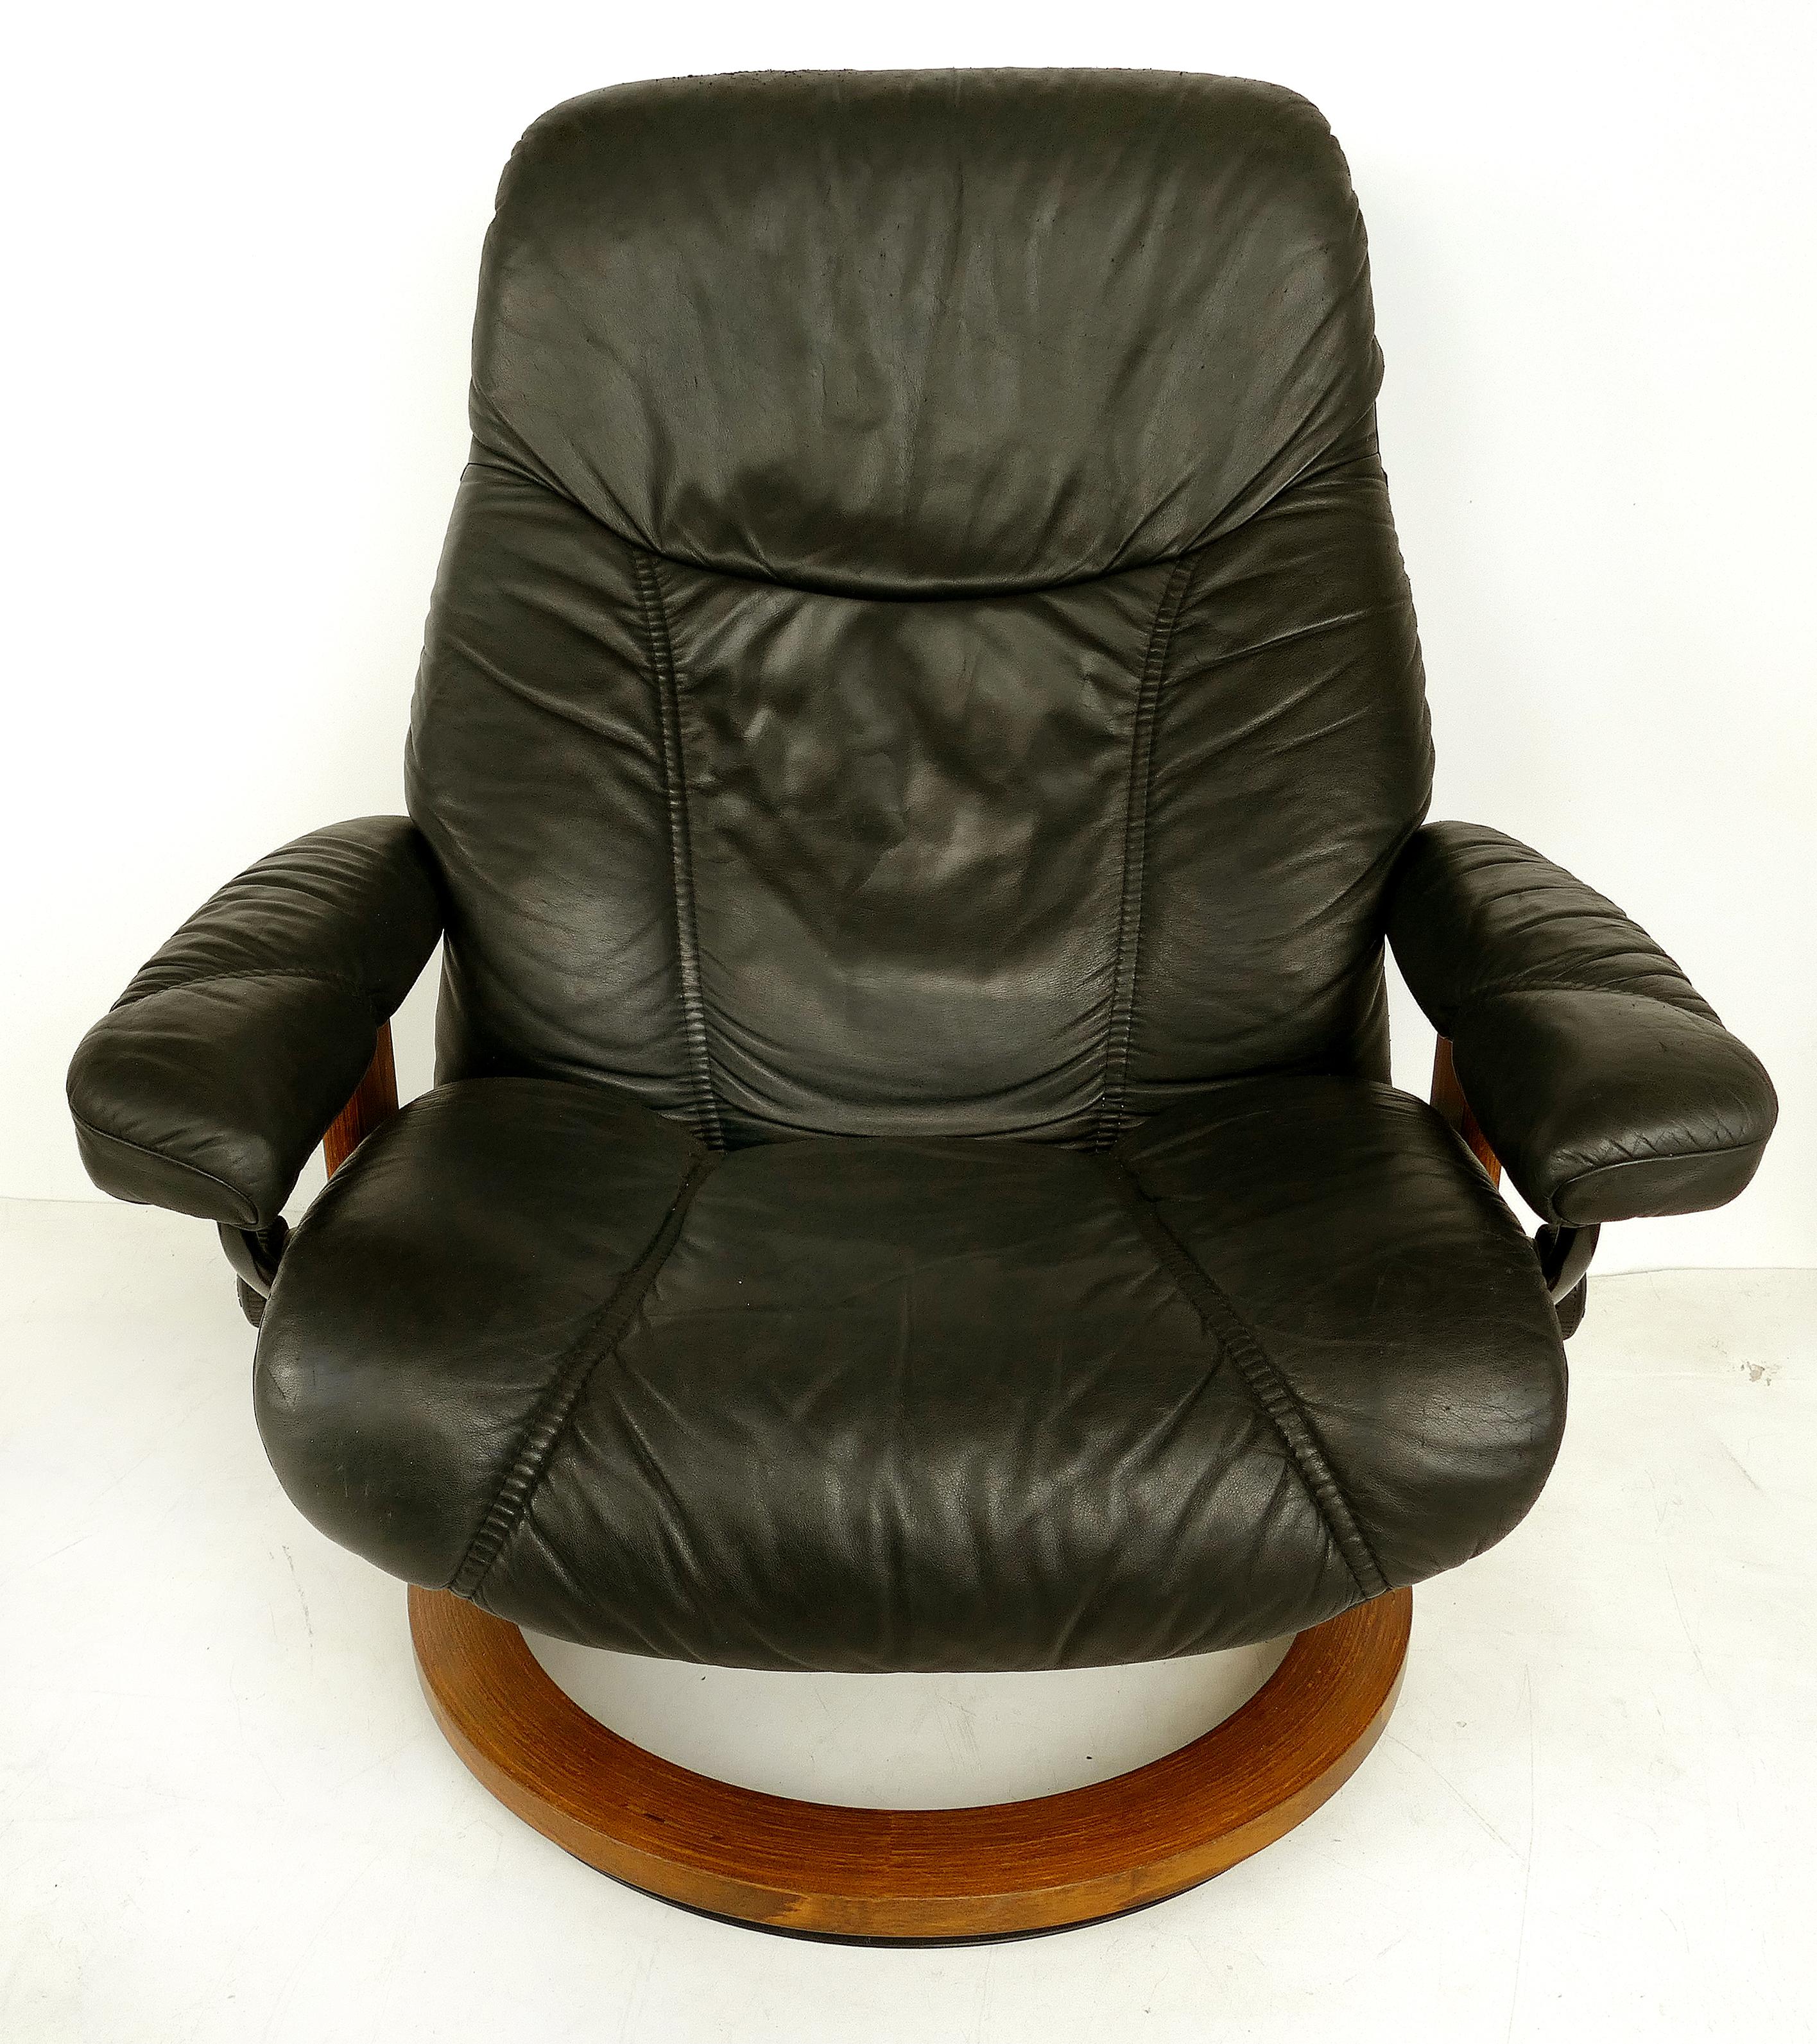 Ekornes reclining leather lounge chair with ottoman from Norway.

Offered for sale is a black leather and bentwood recliner and ottoman by Ekornes of Norway. The set is in good condition, however, the top and back of the chair has claw marks as